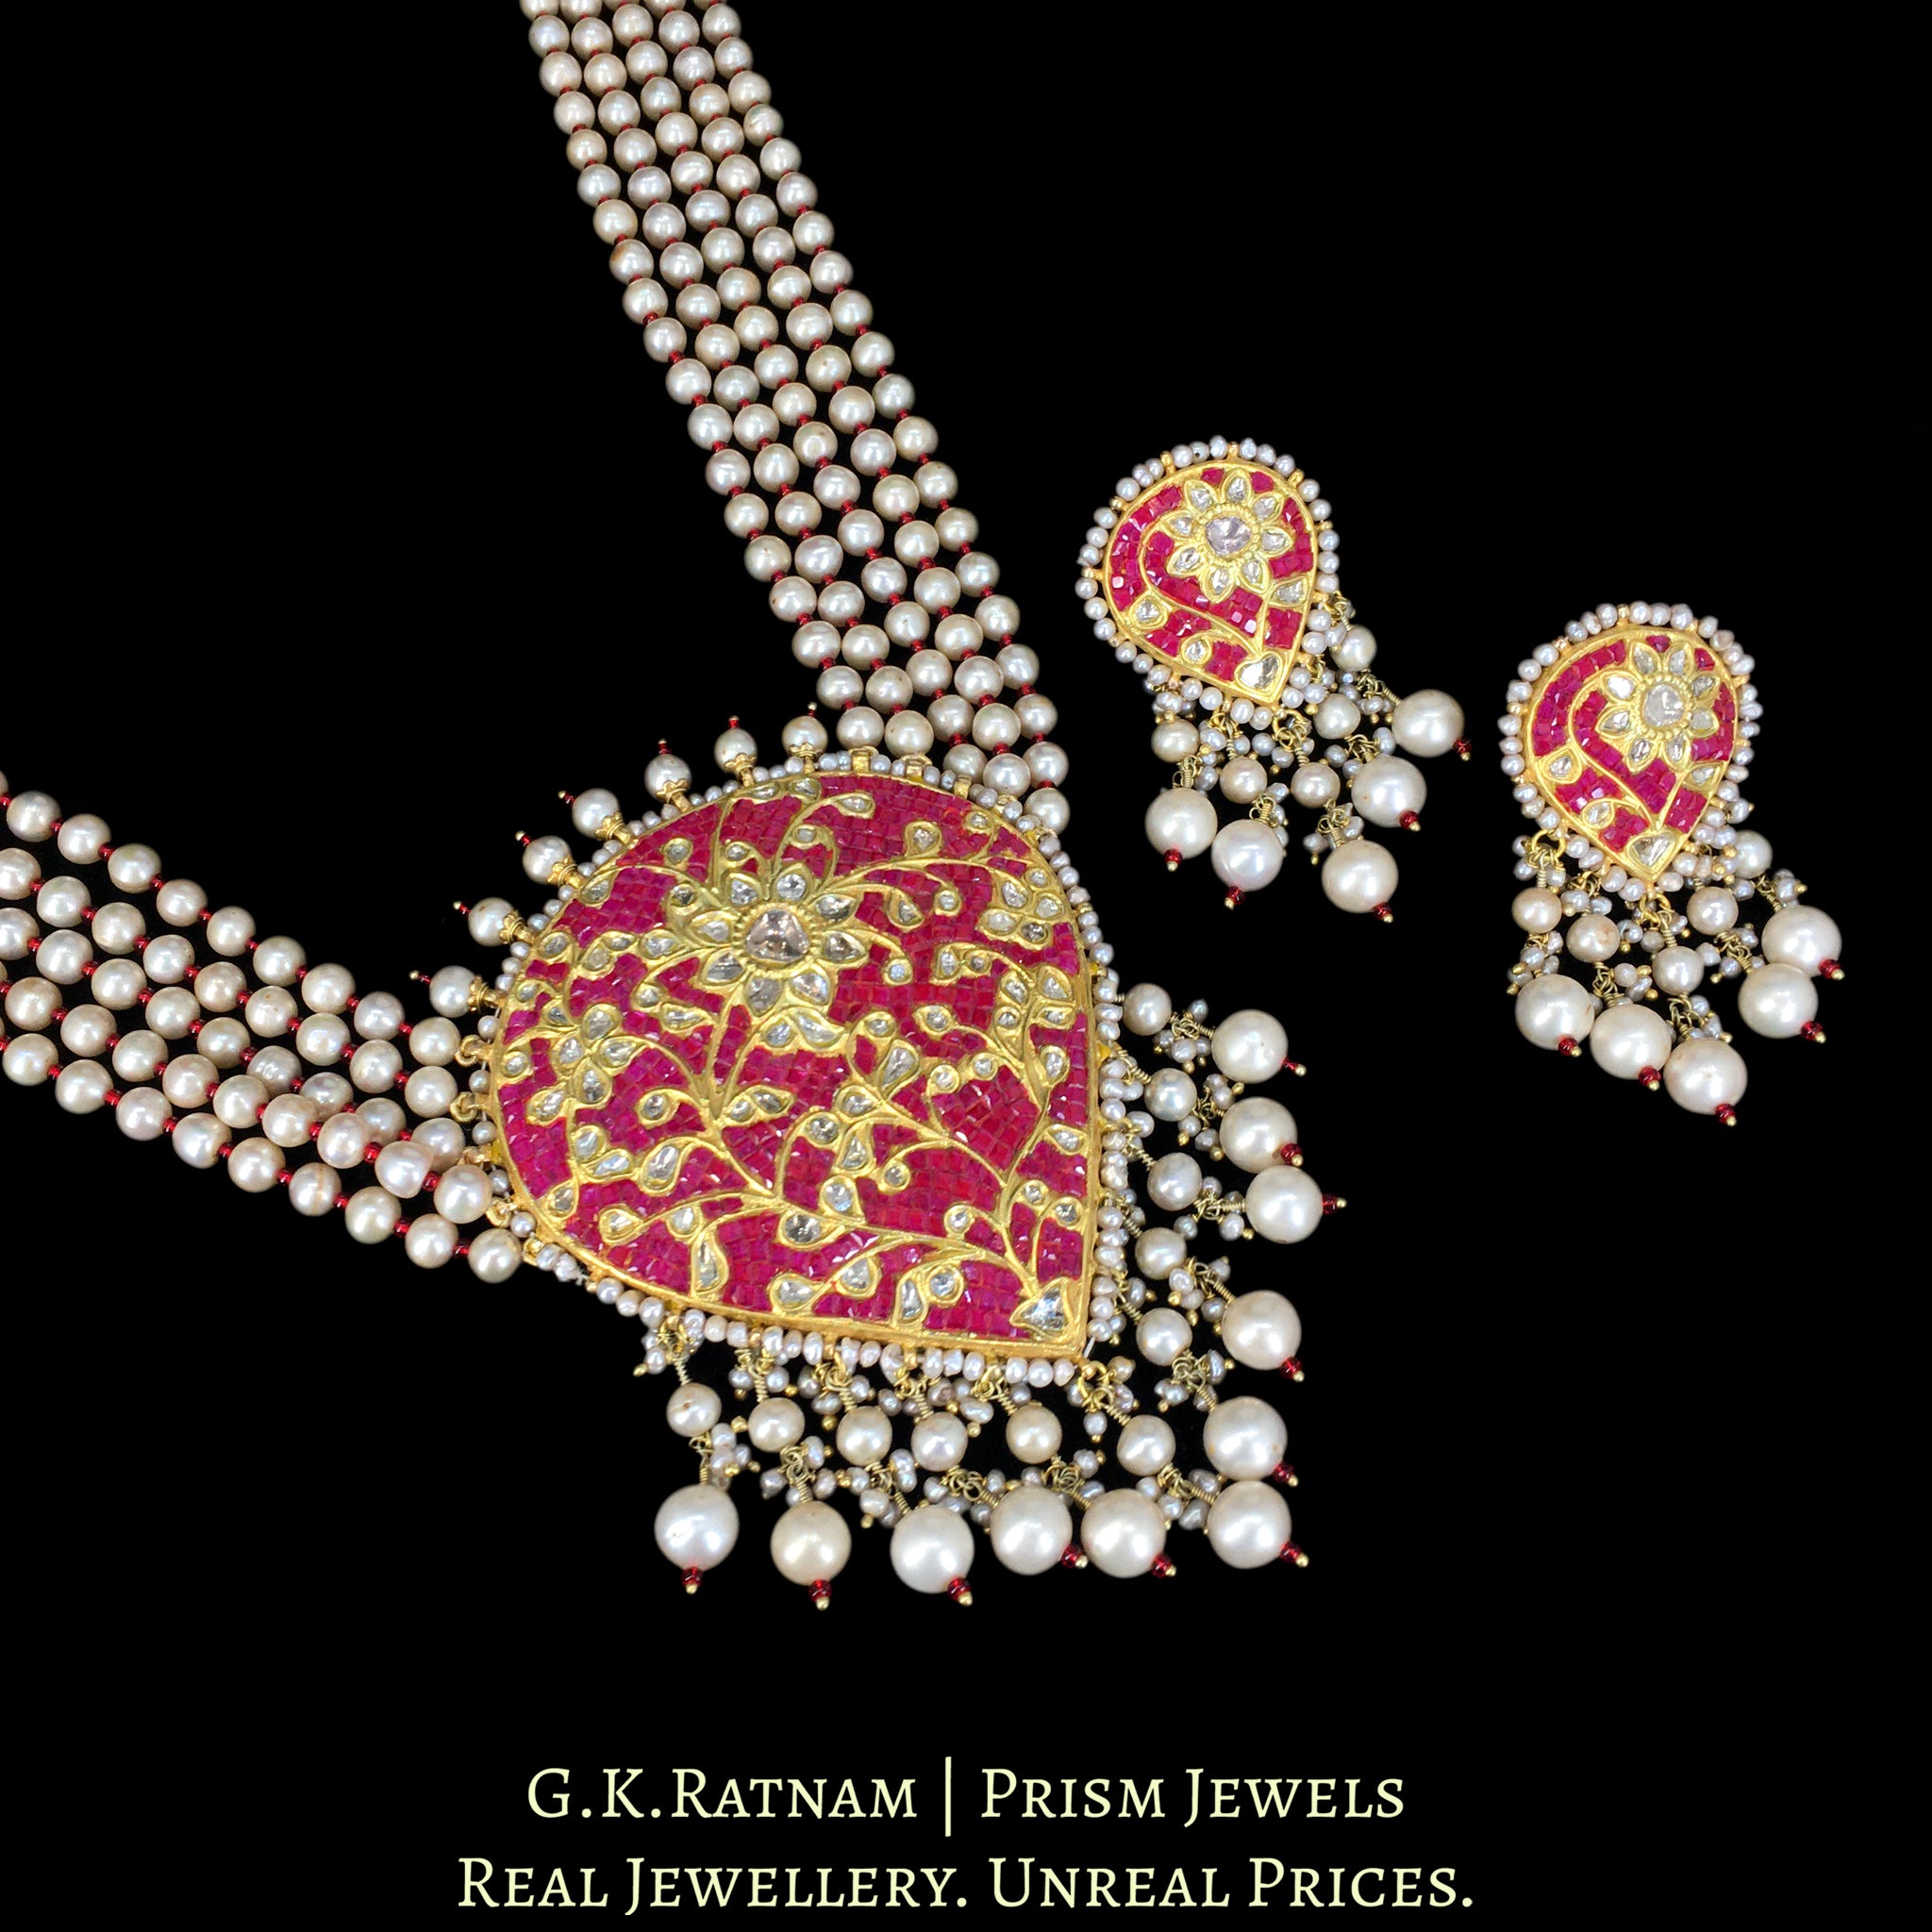 23k Gold and Diamond Polki Pendant Set with Rubies and Antiqued Hyderabadi Pearls